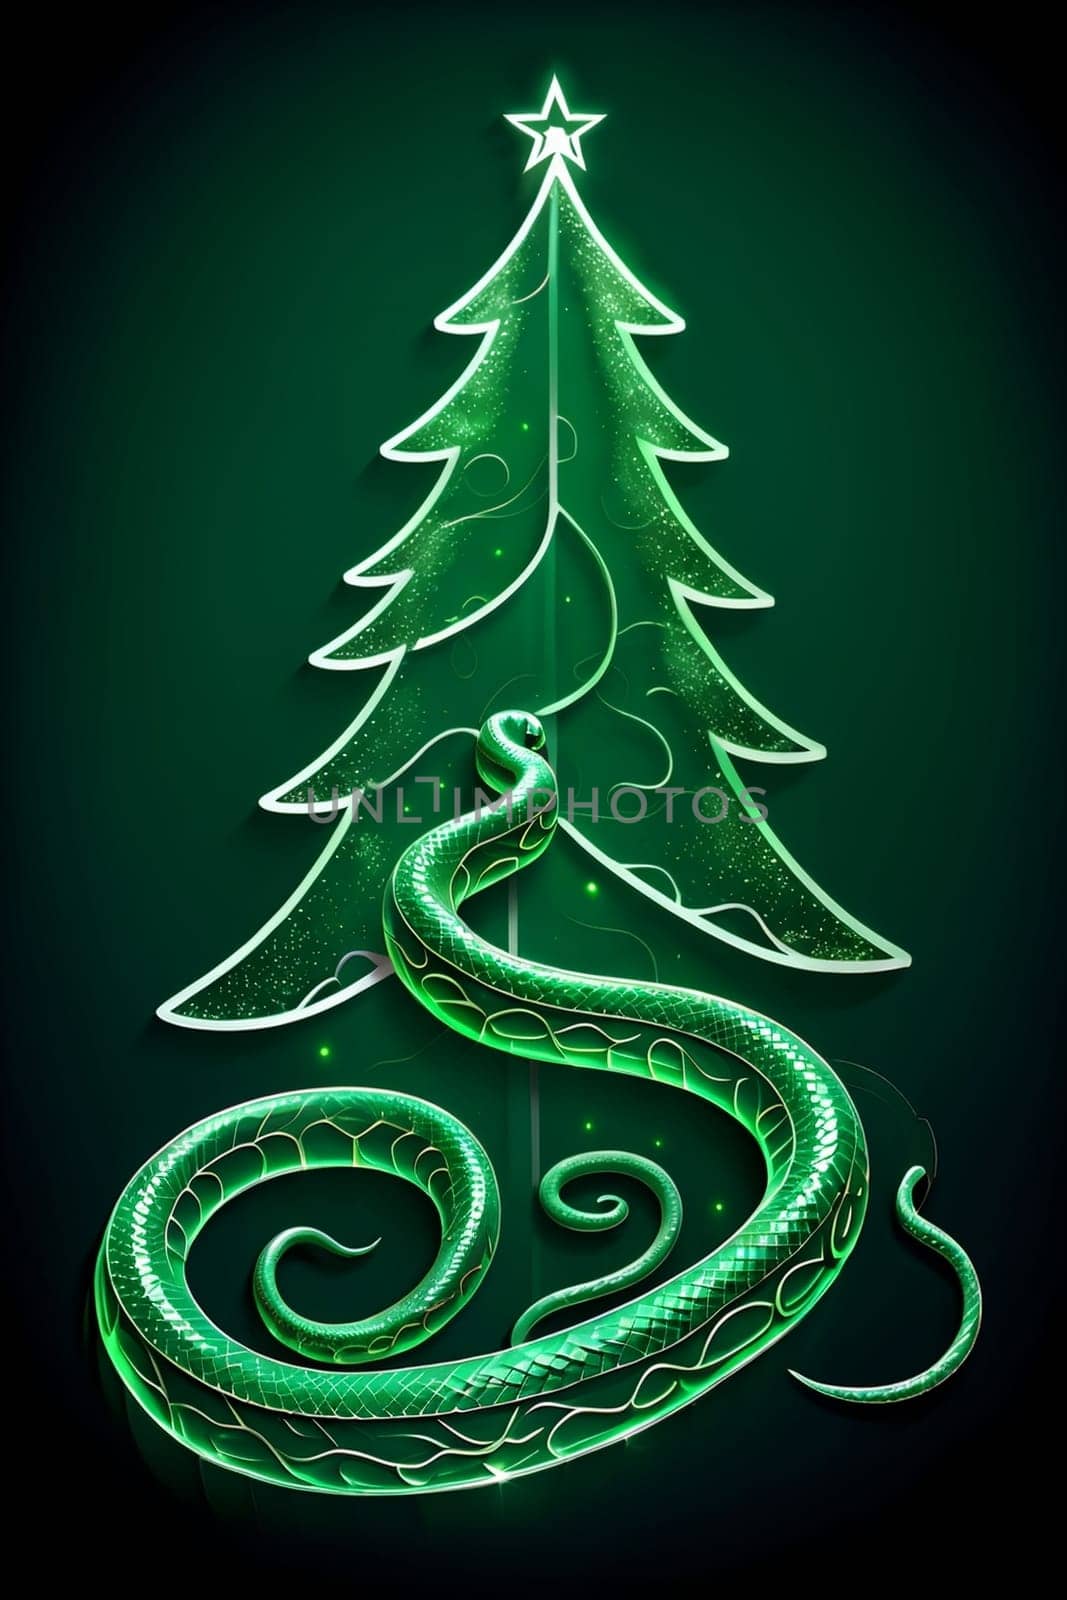 green fir tree and snake on green background .